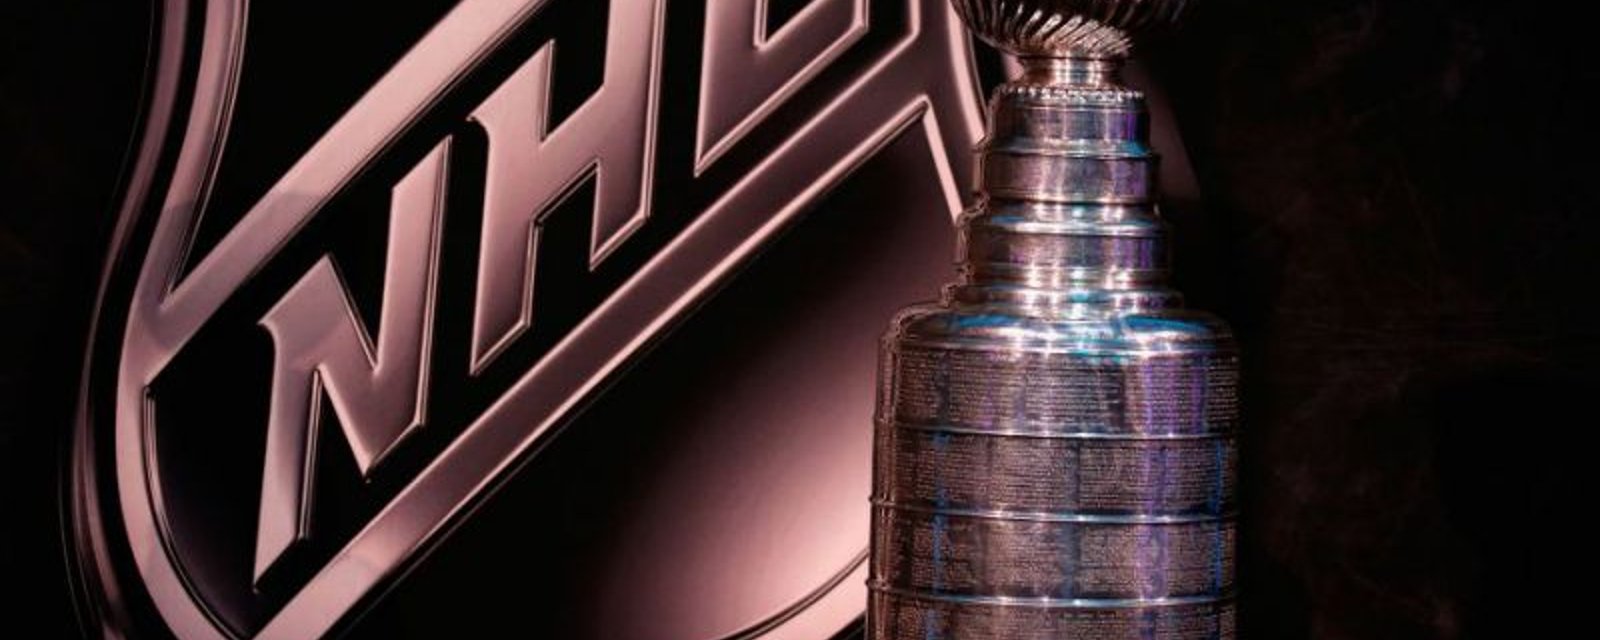 Stanley Cup viewership down double-digits after players’ protest!